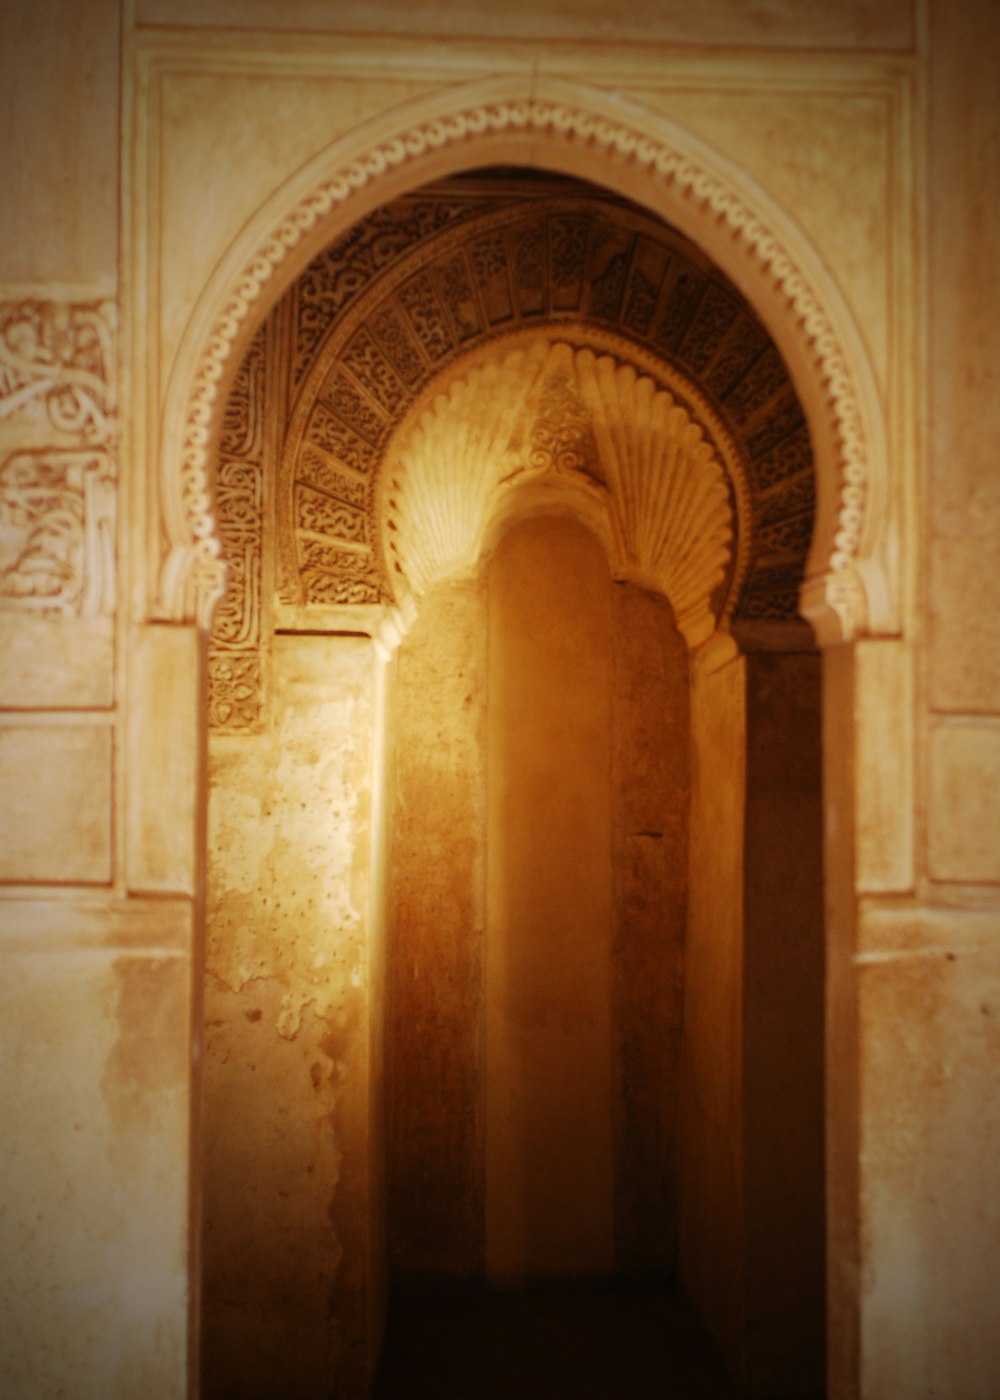 an archway in a stone building with a light coming through it